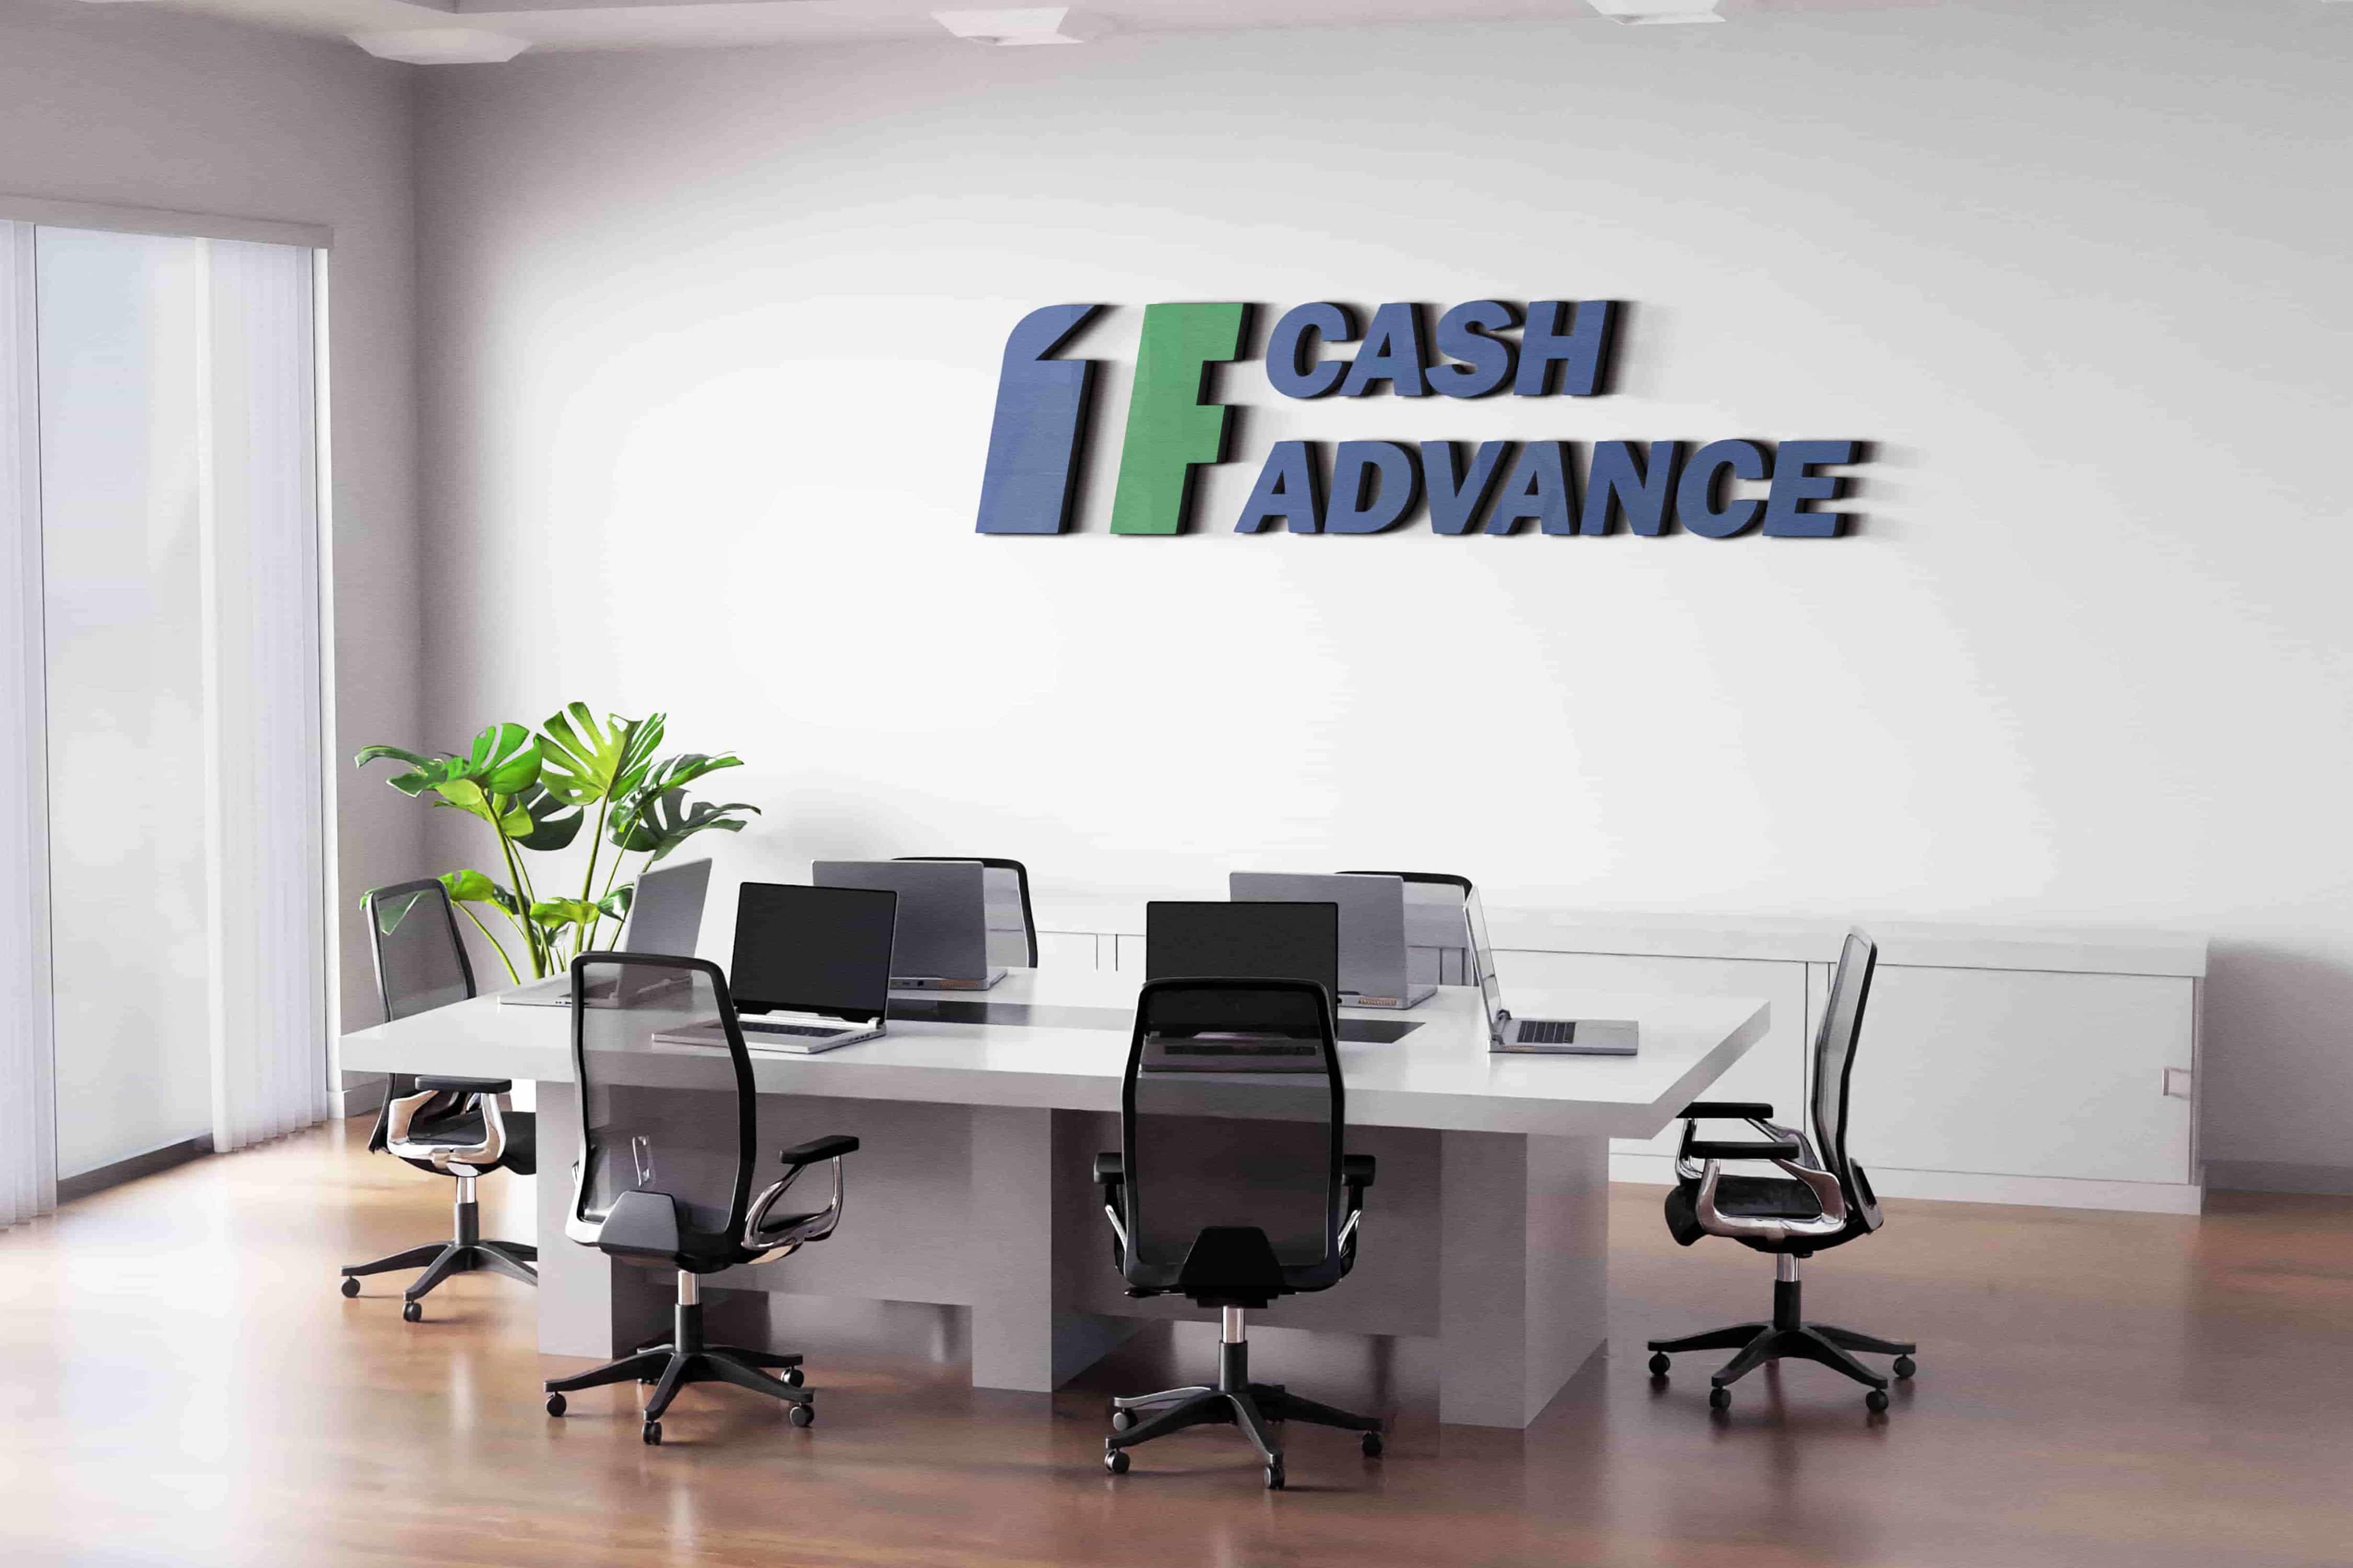 1F Cash Advance payday loans in Chattanooga, TN